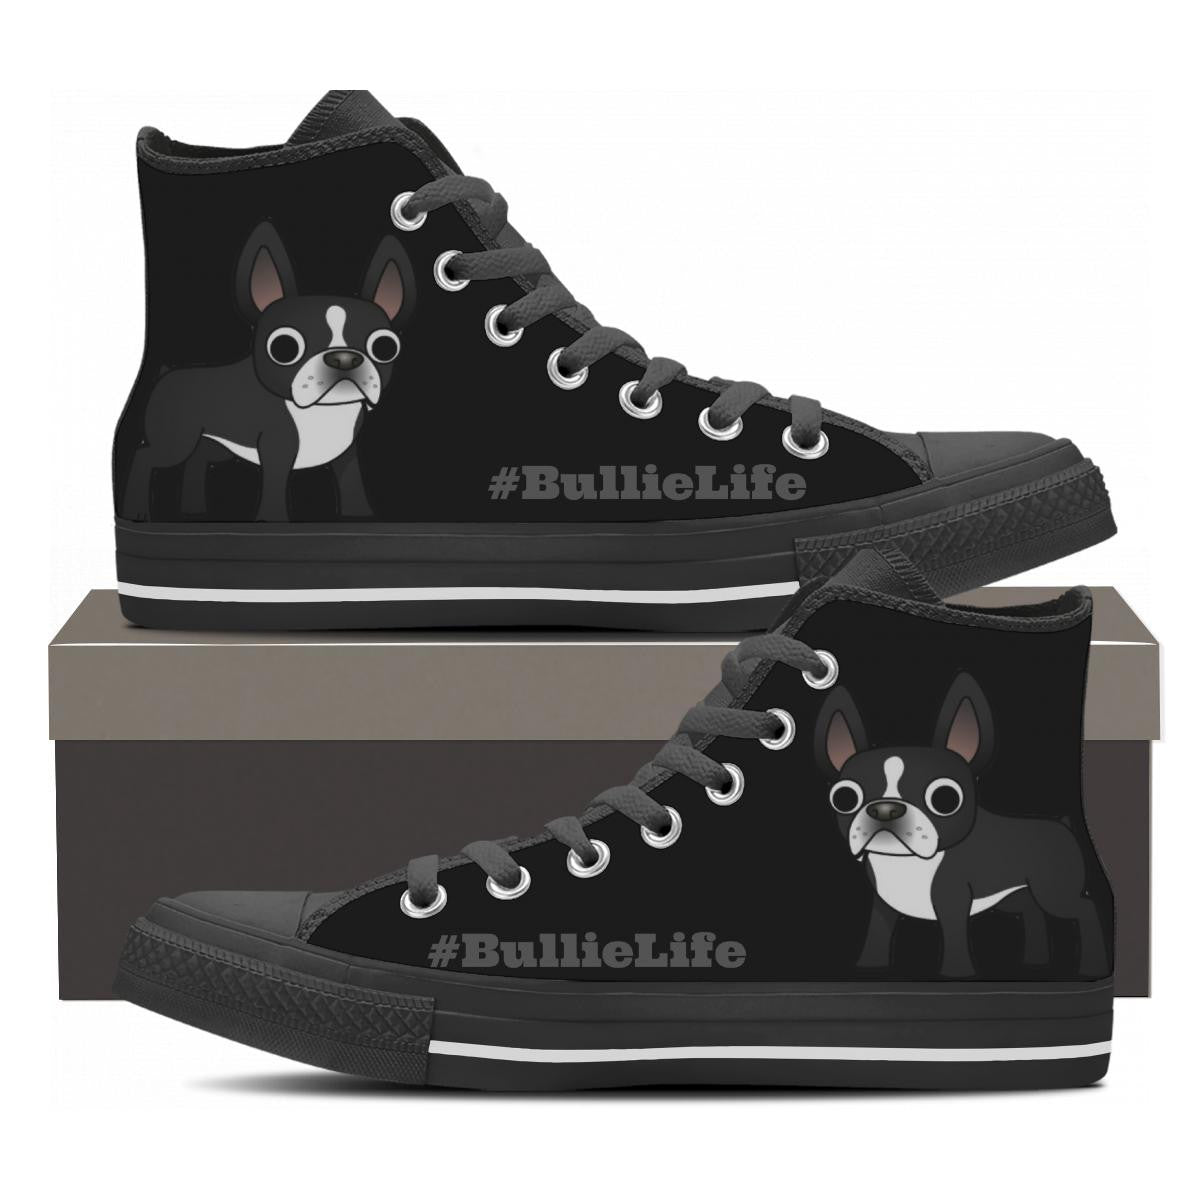 French Bulldog High Top Shoes